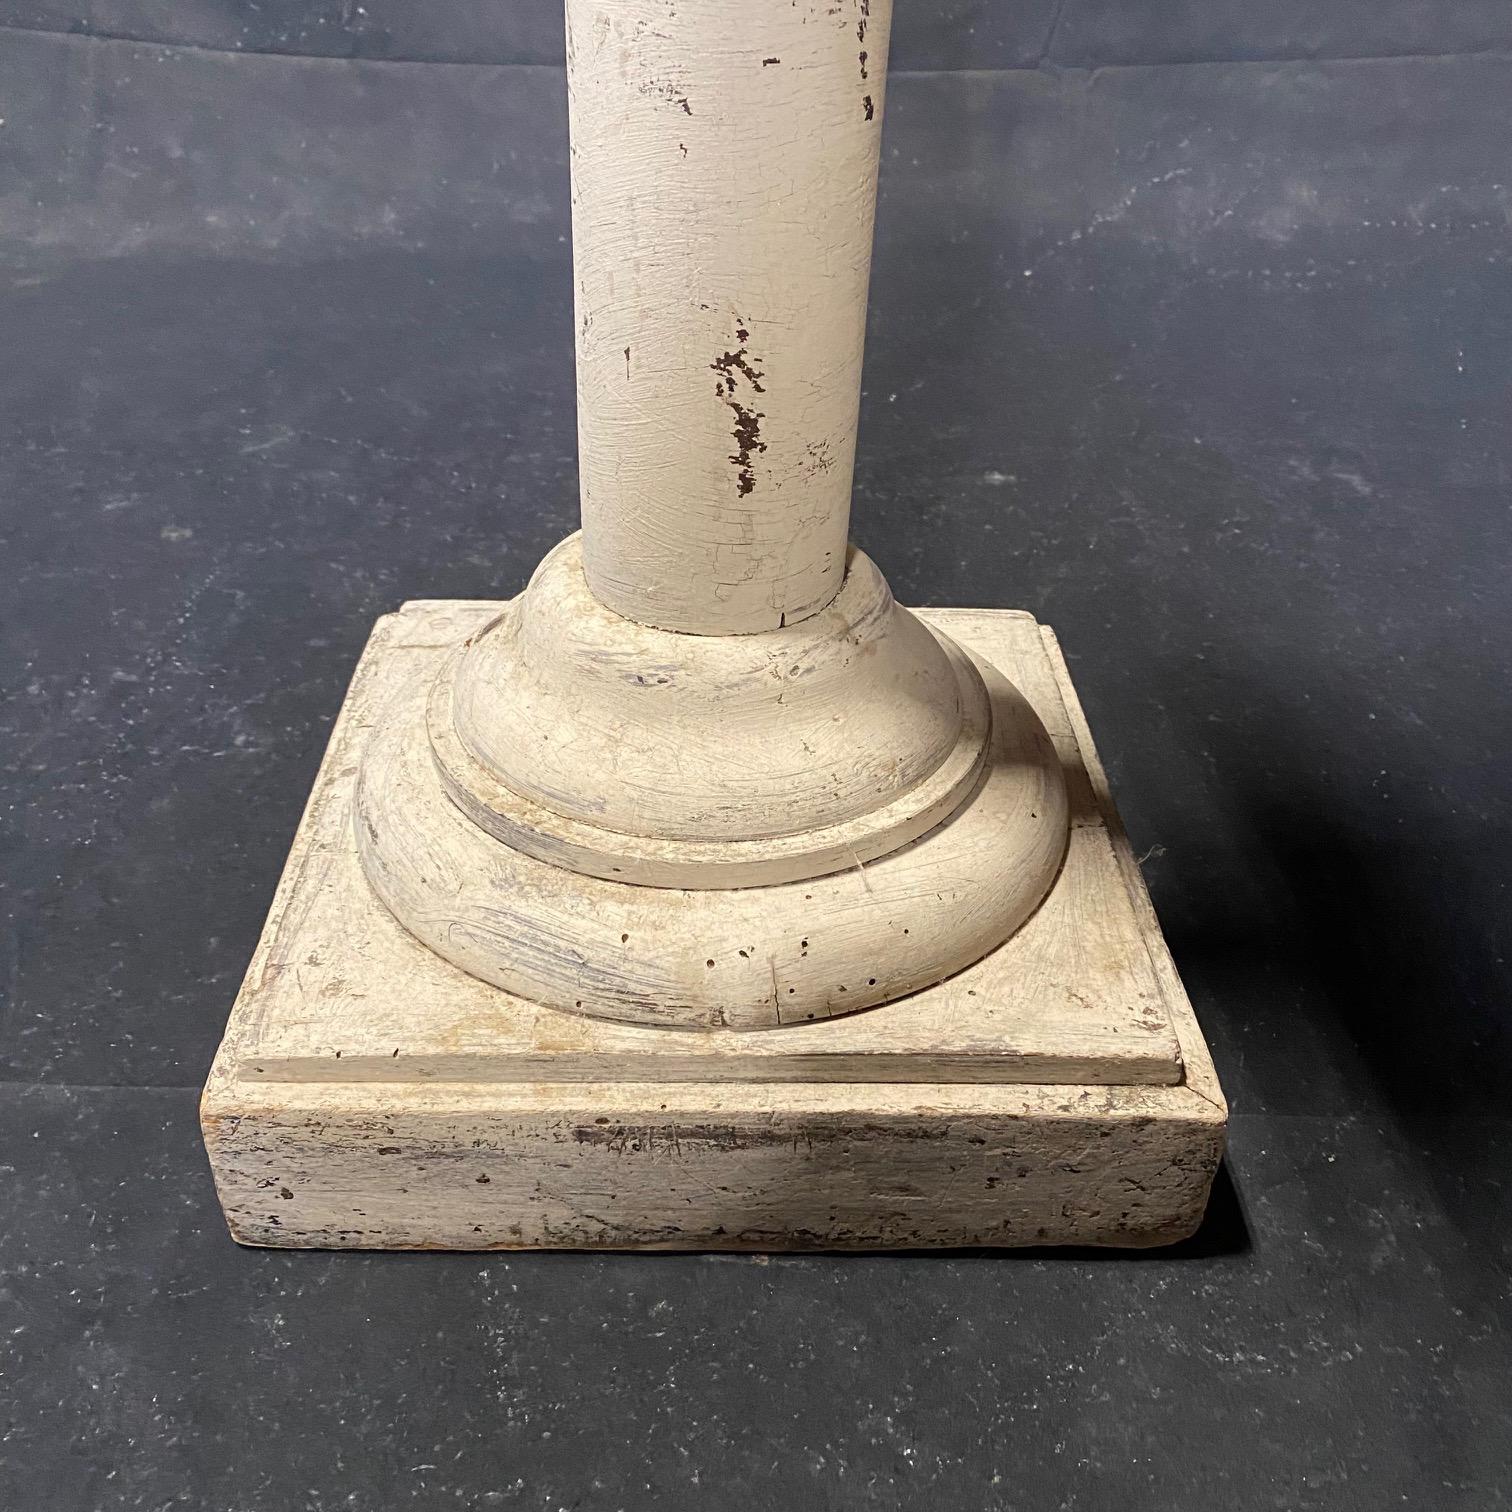 Bought in the South of France, this early wooden French pedestal column would serve as a focal piece or a plant stand. Retaining its early beigey ivory paint, this neutral pedestal column could serve a number of uses in any home decor. 
#6366

